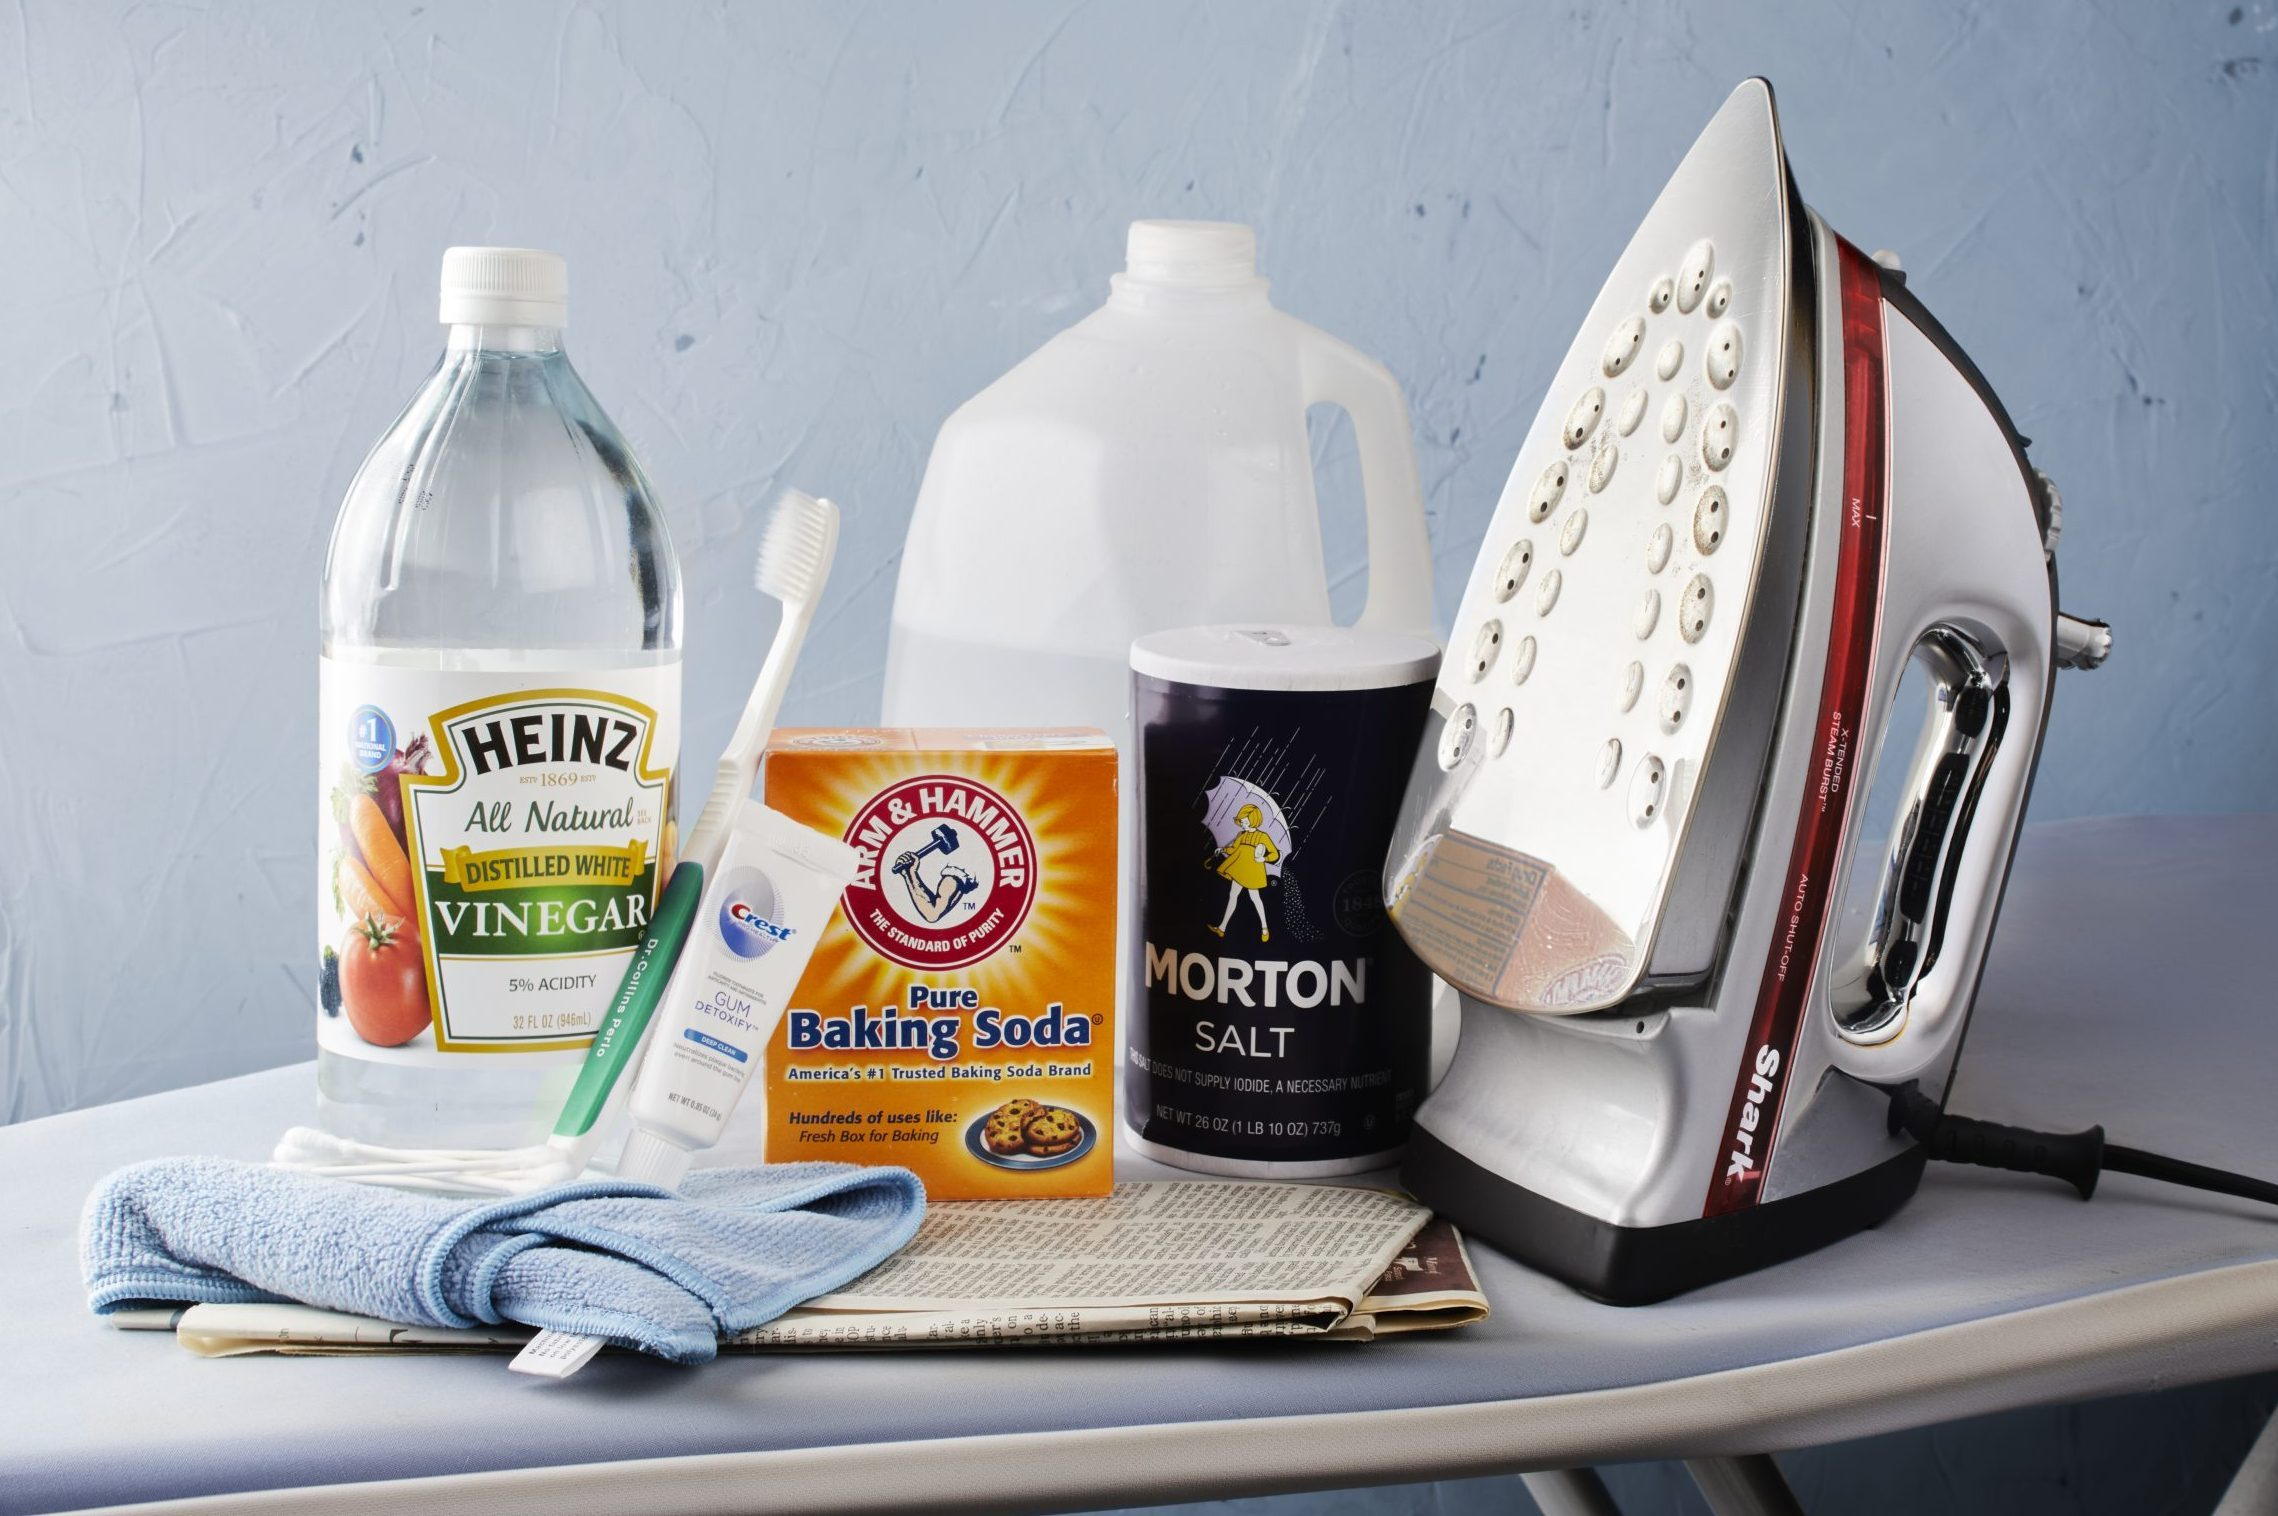 Use distilled water and distilled white vinegar to clean an iron